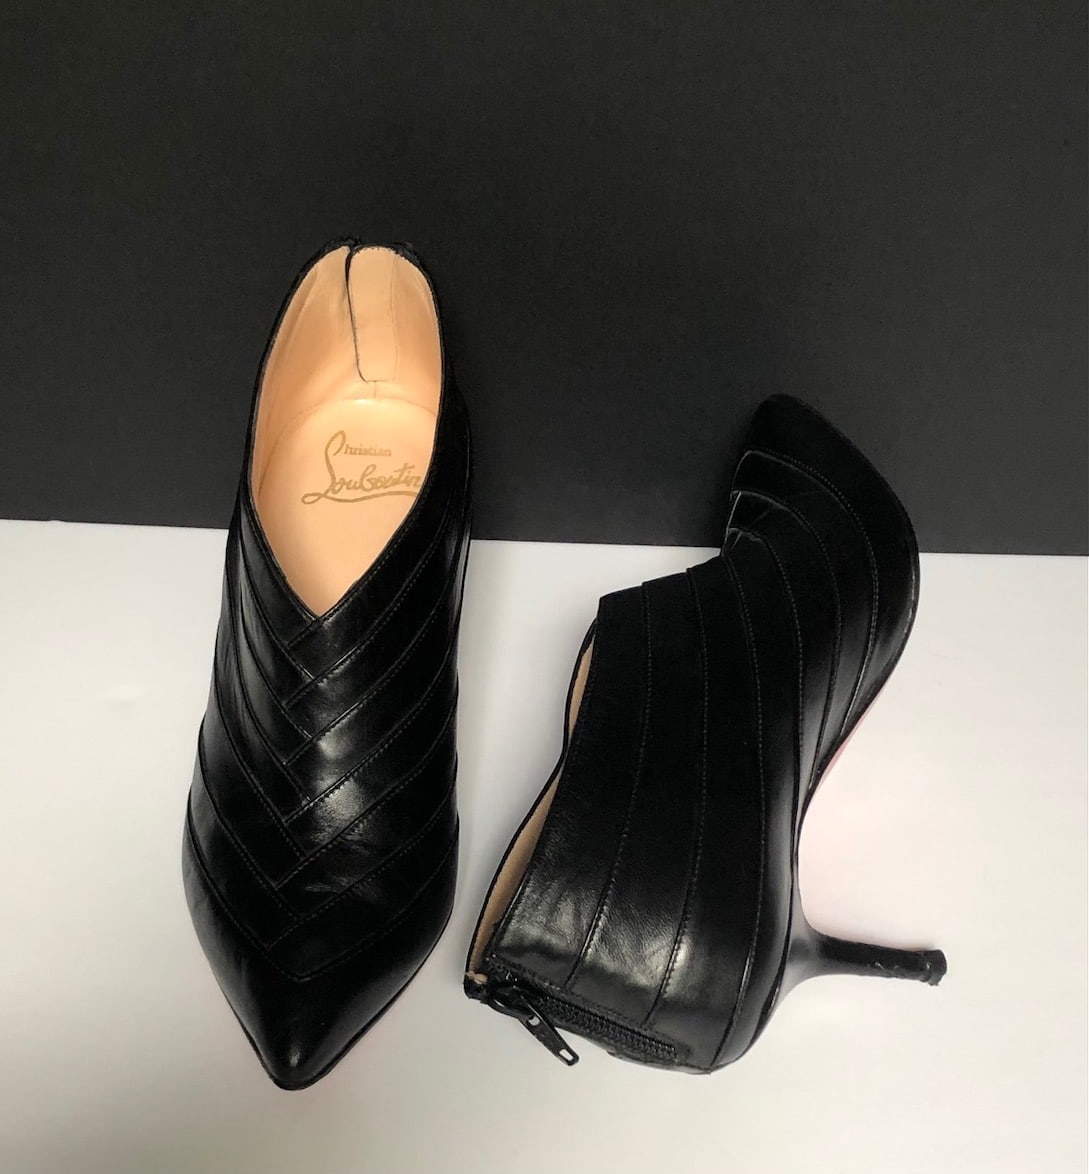 Christian Louboutin - Authenticated Ankle Boots - Lizard Black Plain for Women, Very Good Condition